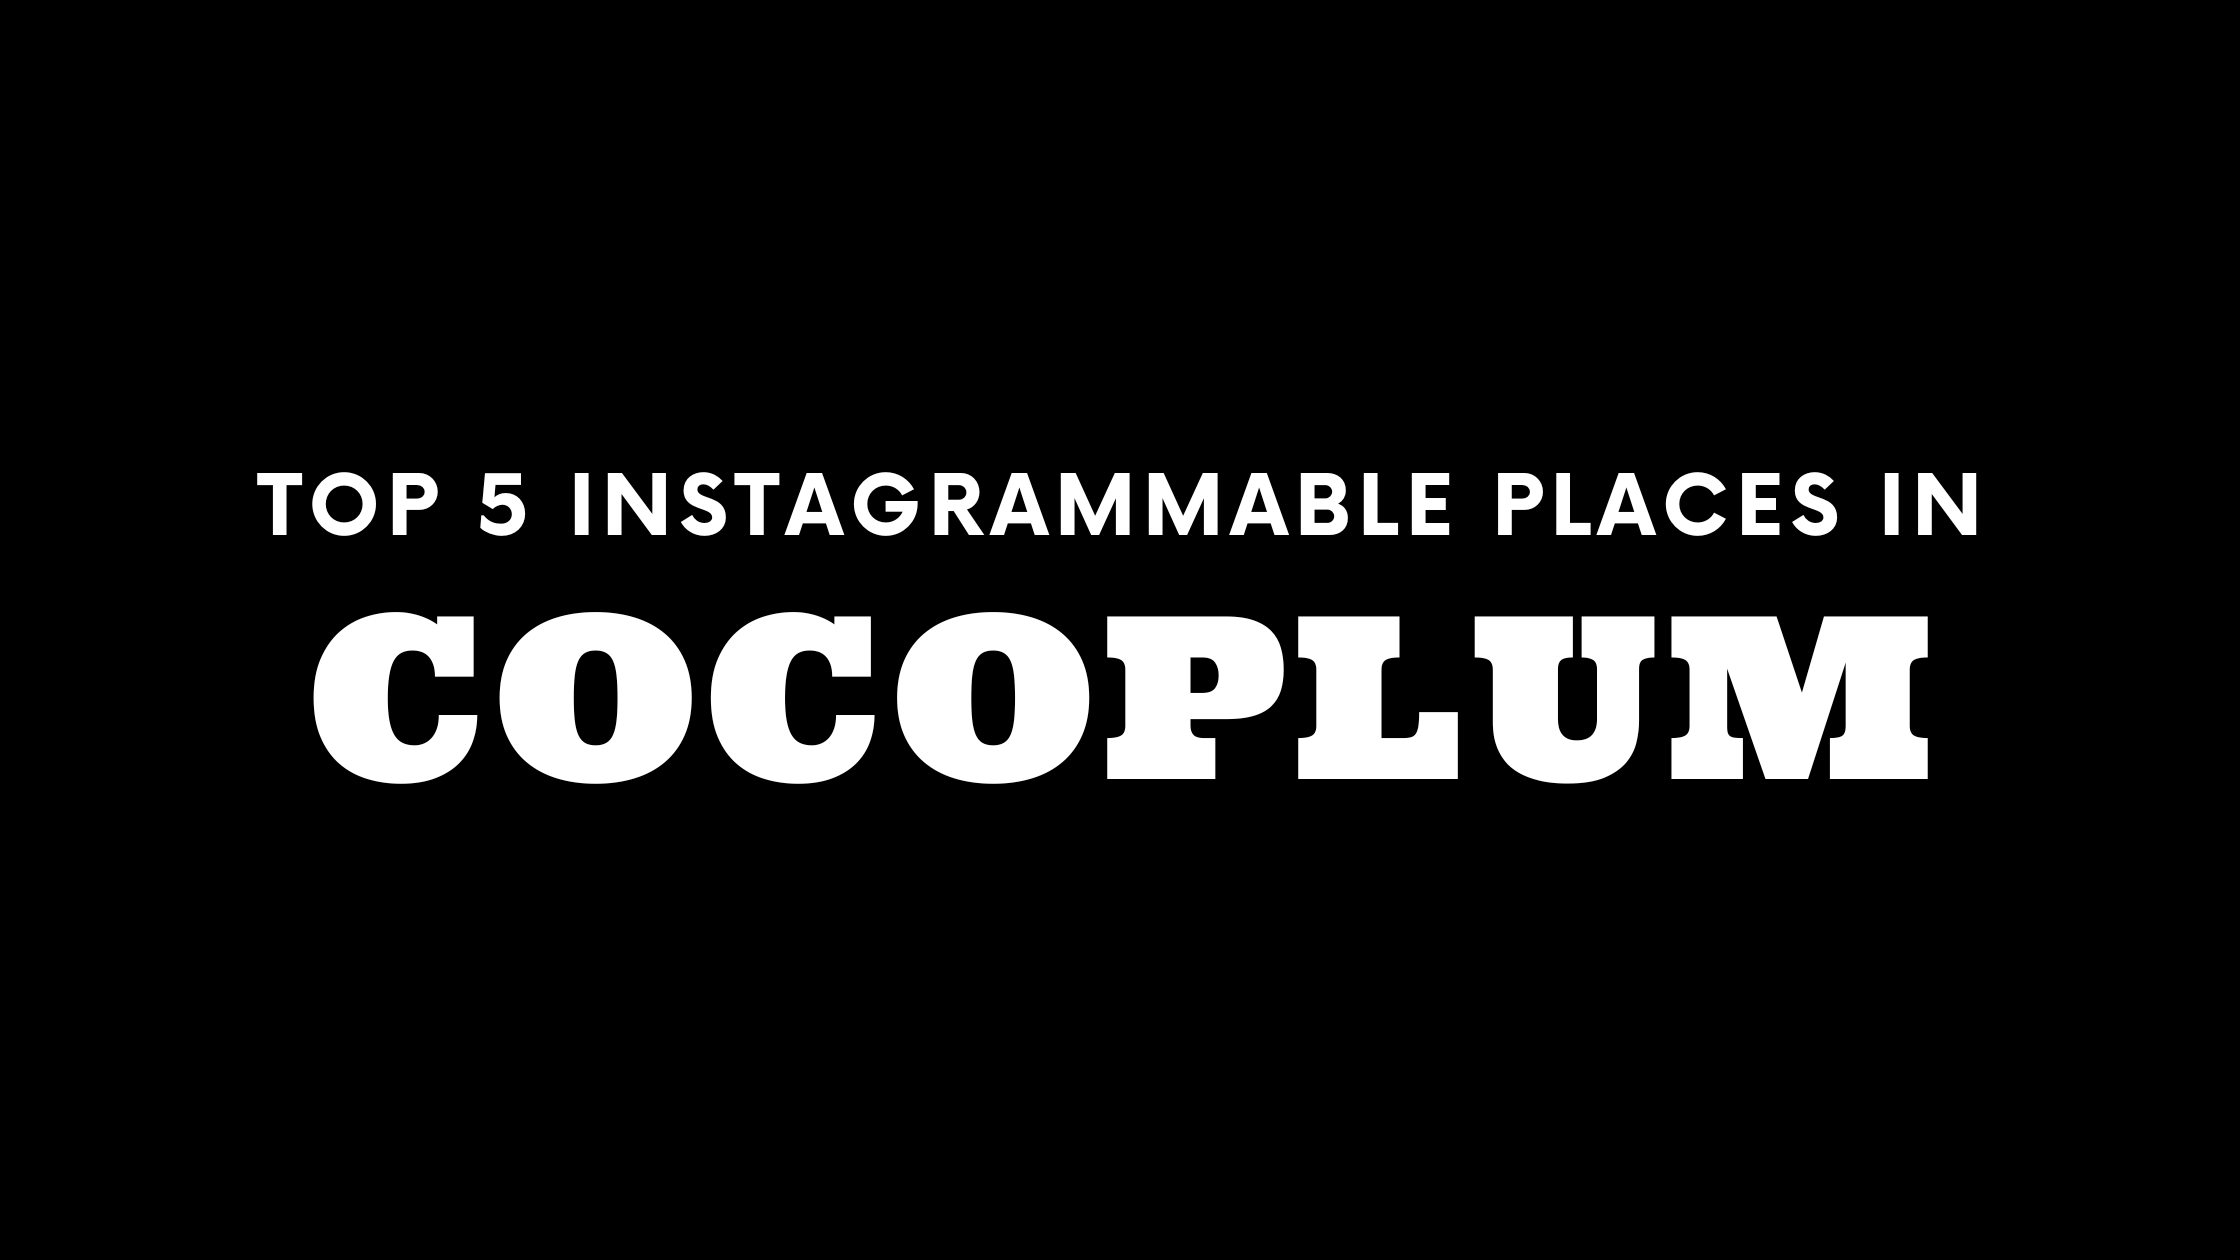 Top 5 Instagrammable Places in Cocoplum